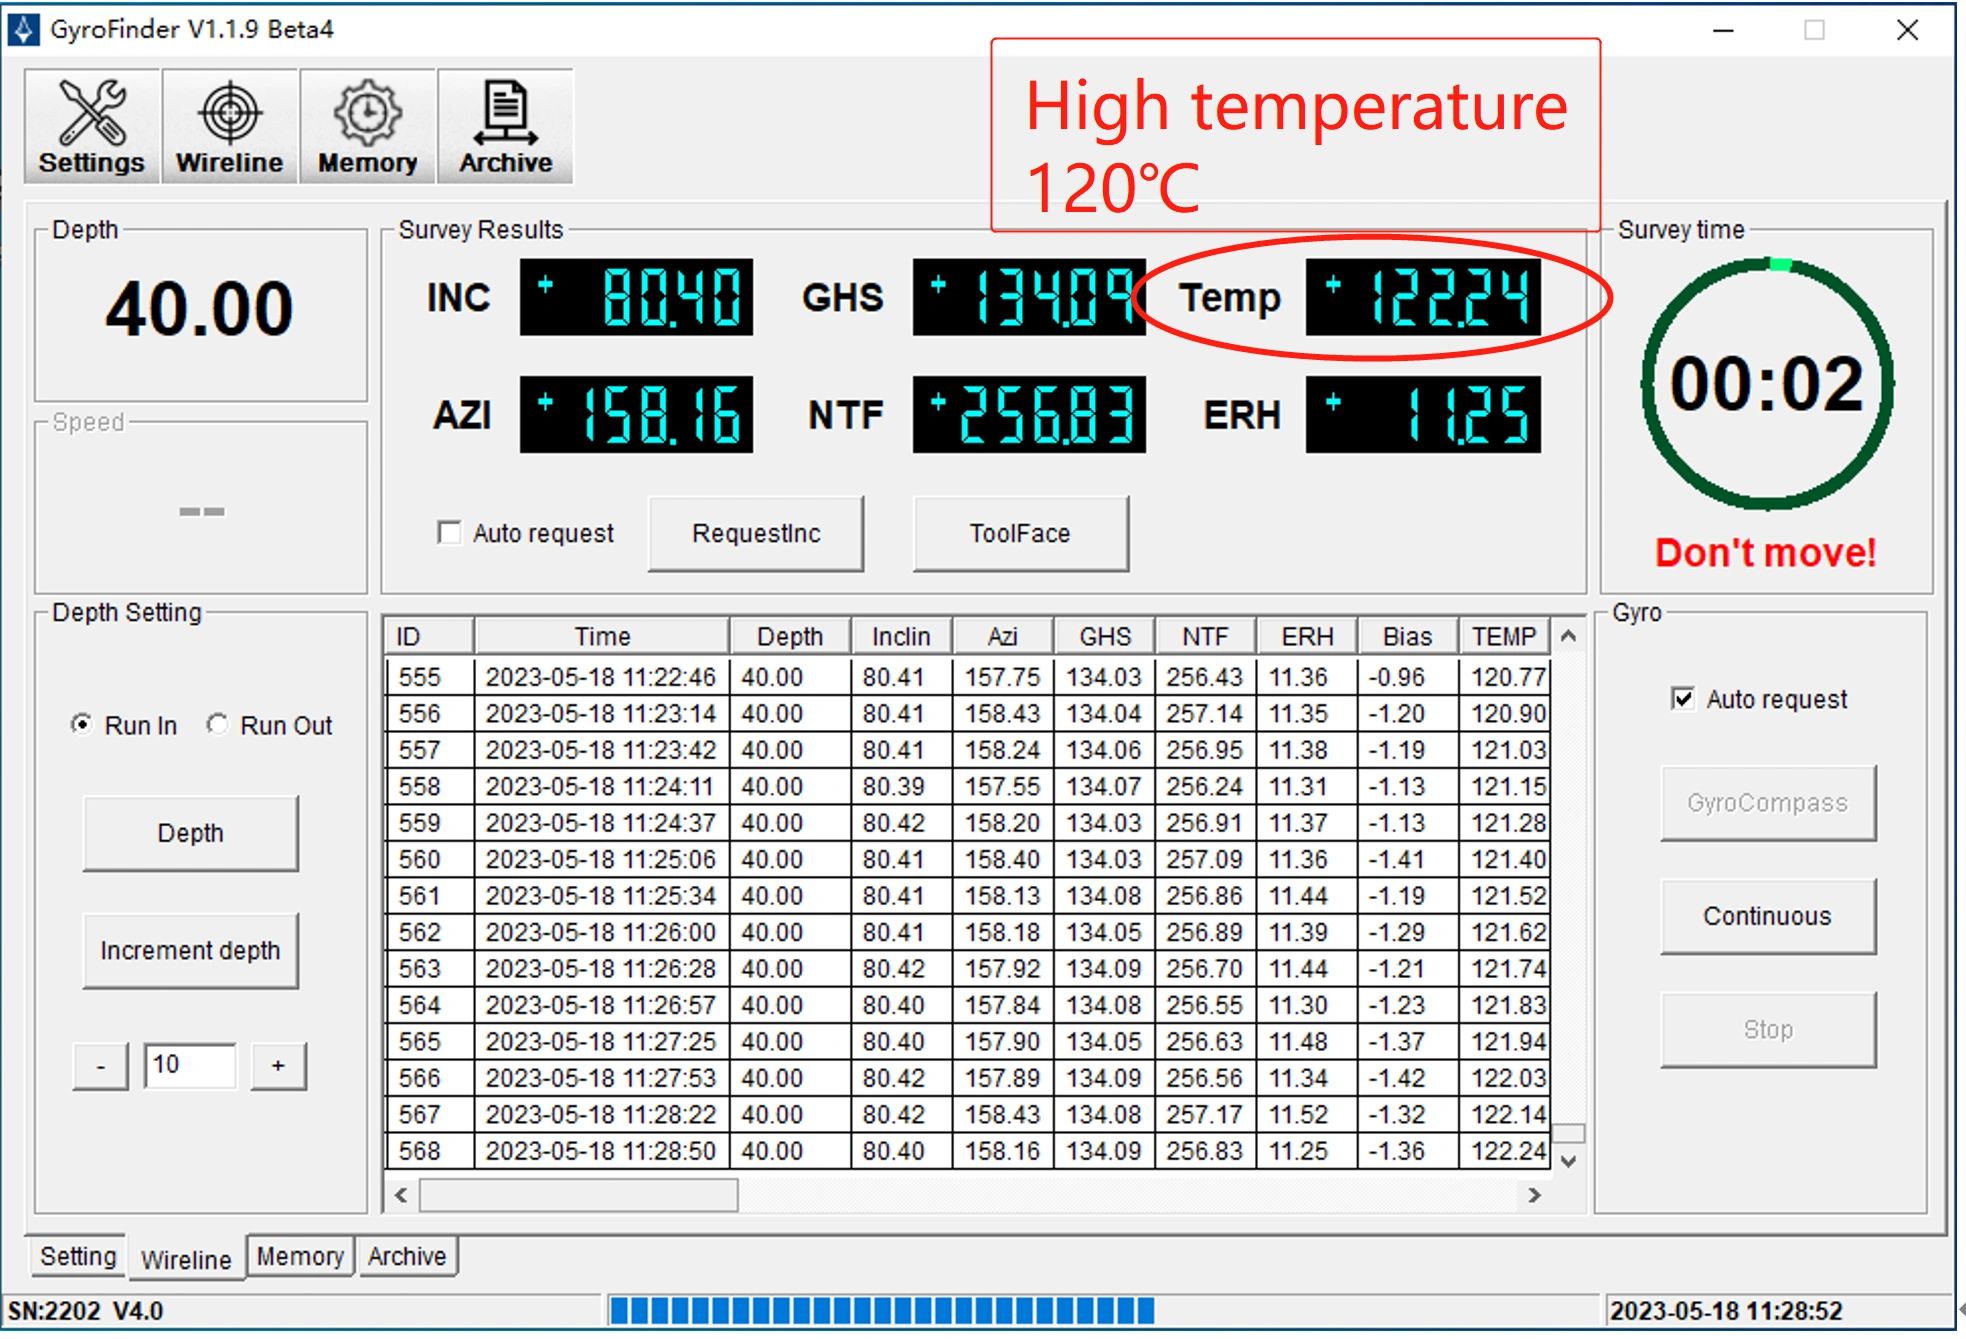 WinGyroV High temperature +120ºC without heatshield